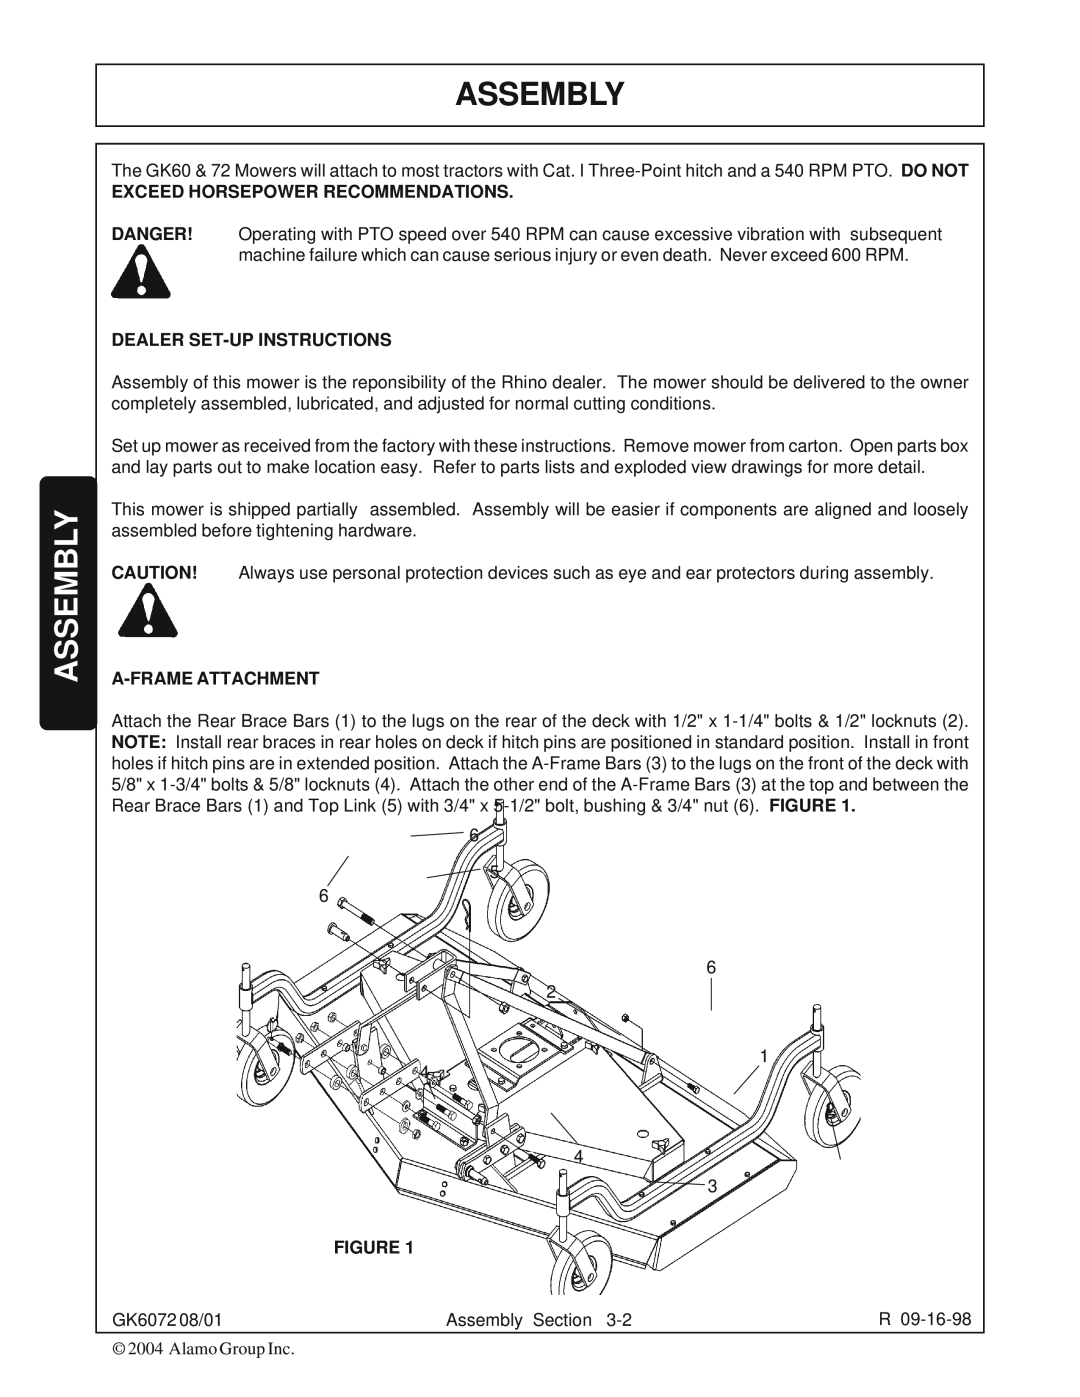 Rhino Mounts GK6072 Assembly, Exceed Horsepower Recommendations, Dealer Set-Upinstructions, A-Frameattachment, Figure 